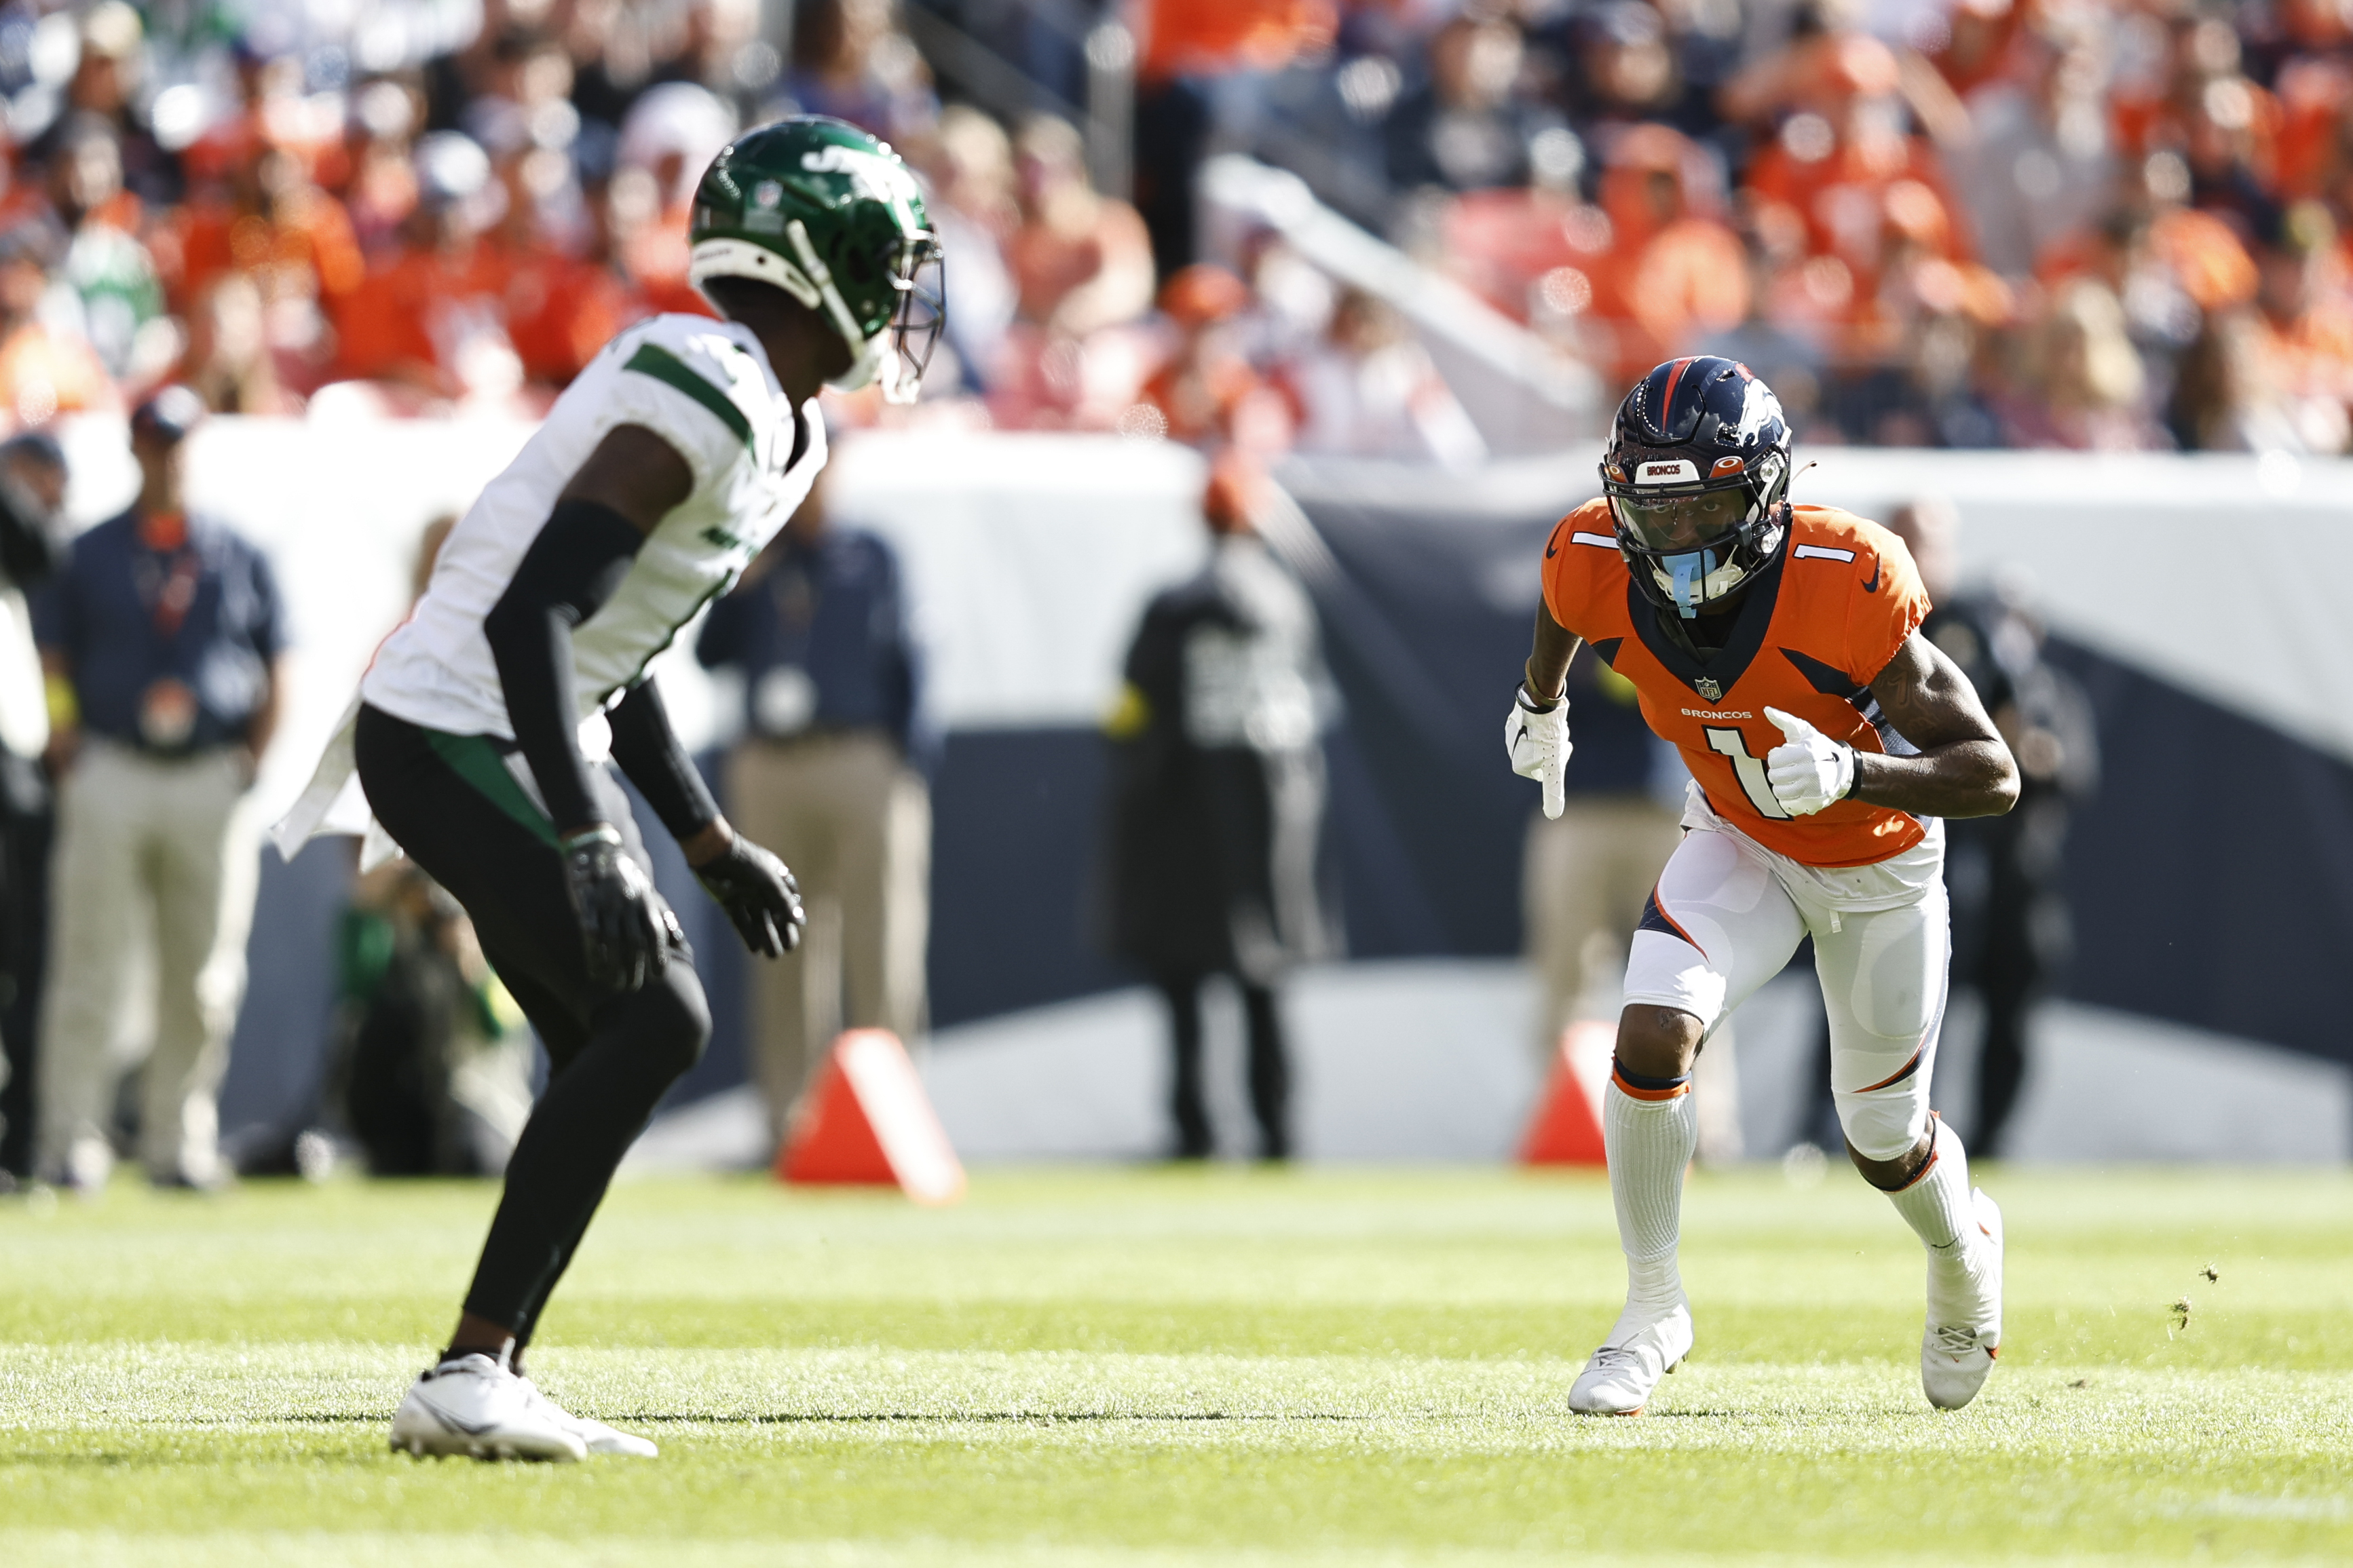 KJ Hamler #1 of the Denver Broncos runs a route against Sauce Gardner #1 of the New York Jets during an NFL football game between the Denver Broncos and the New York Jets at Empower Field At Mile High on October 23, 2022 in Denver, Colorado.